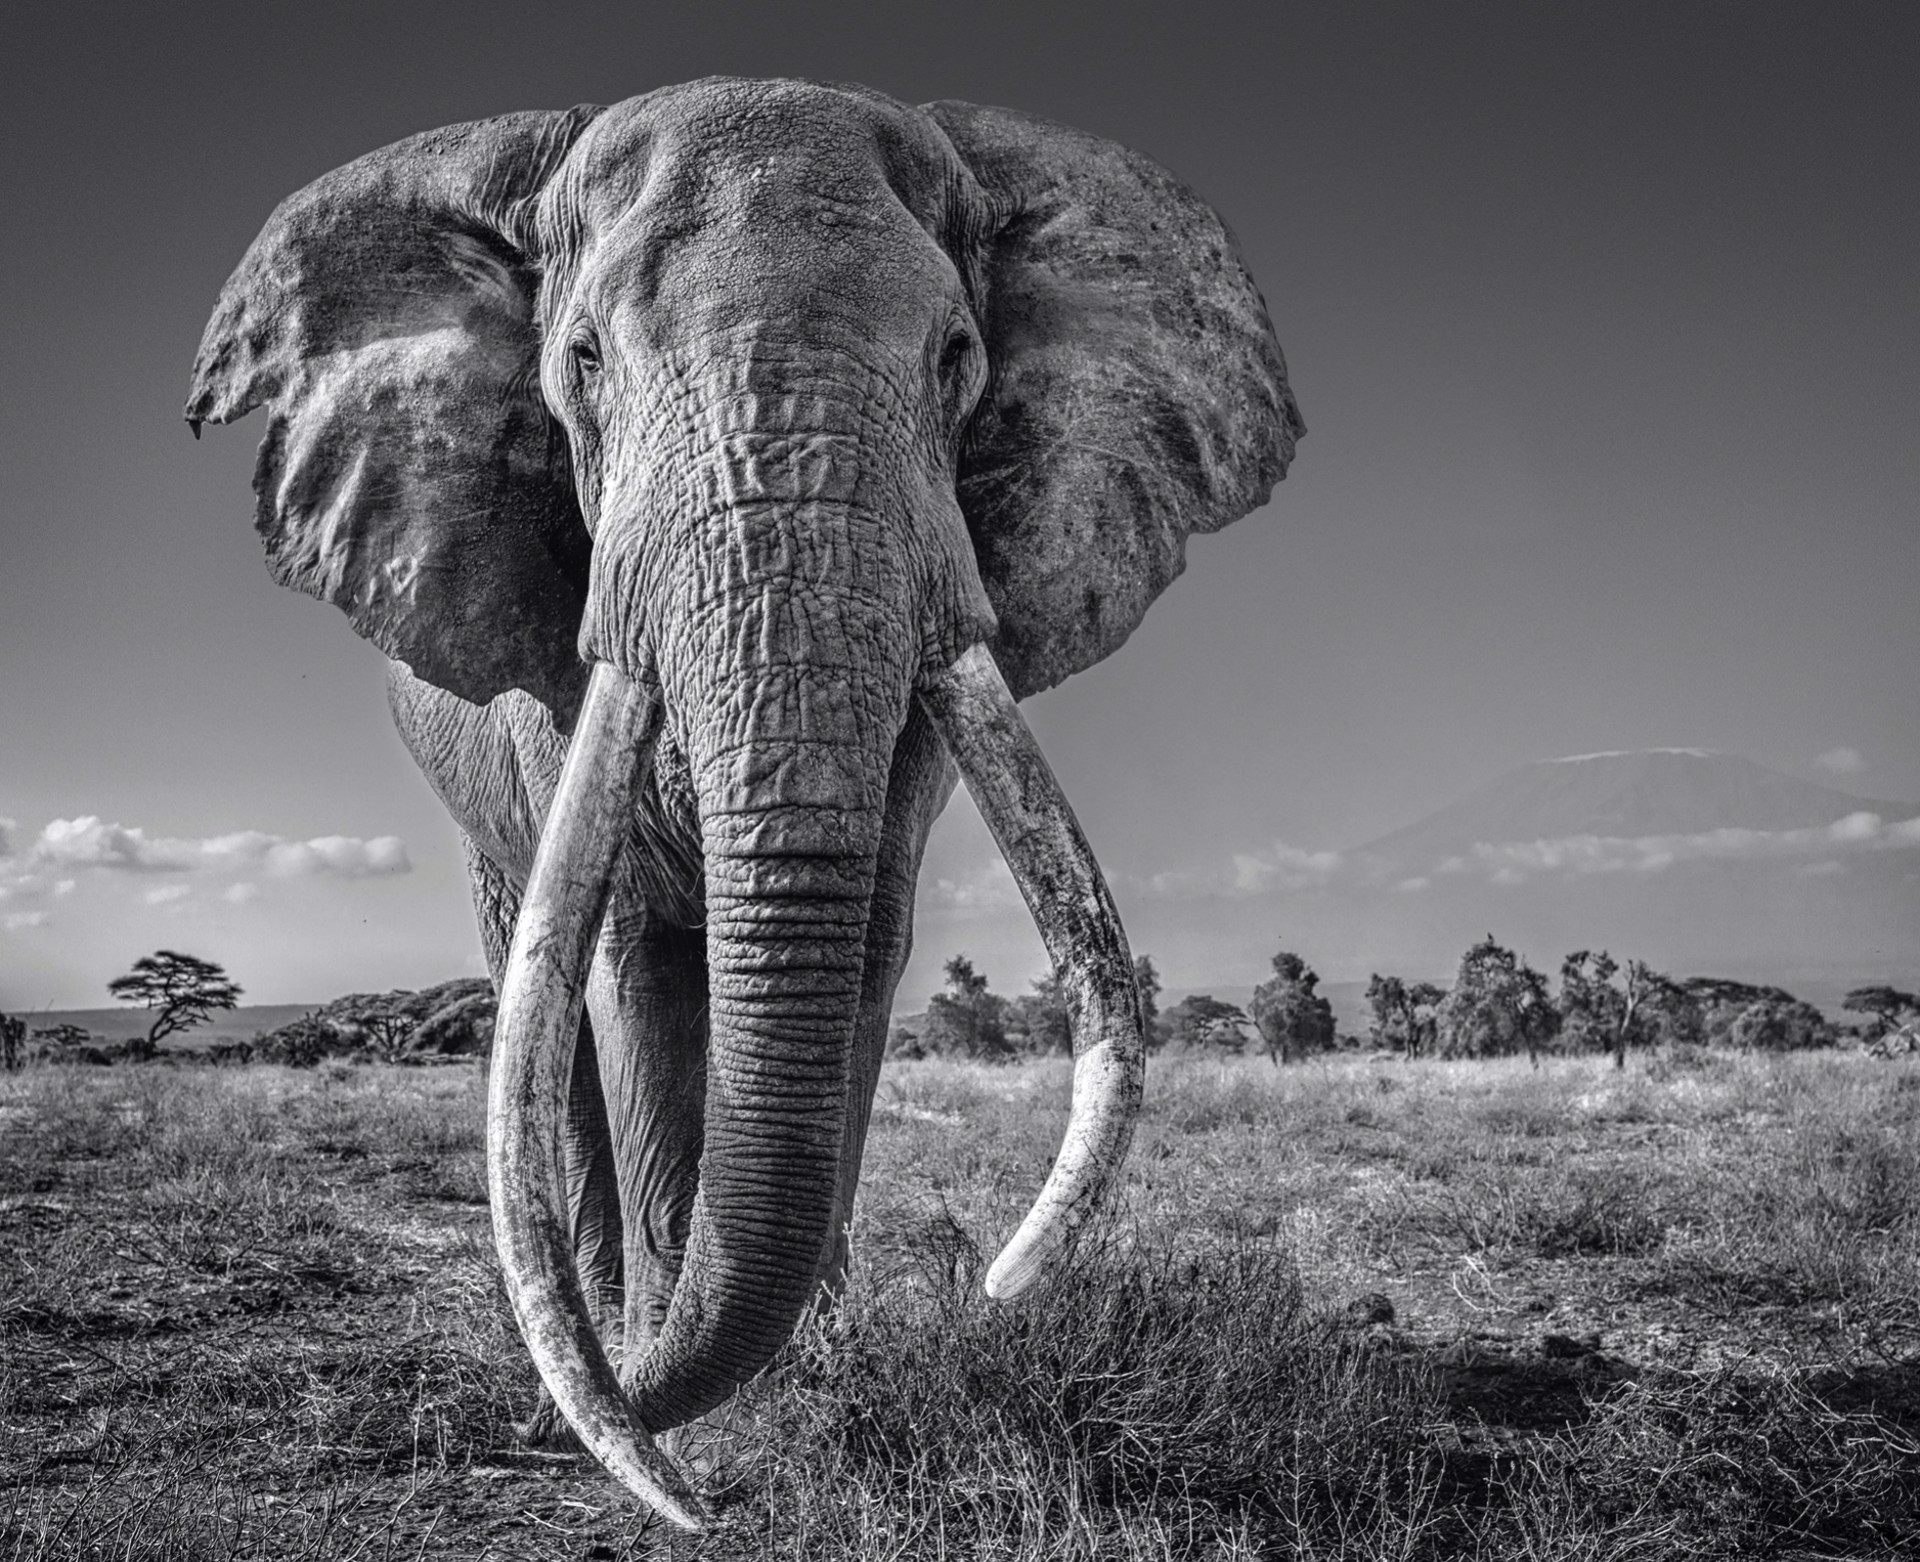 Space for Giants by David Yarrow